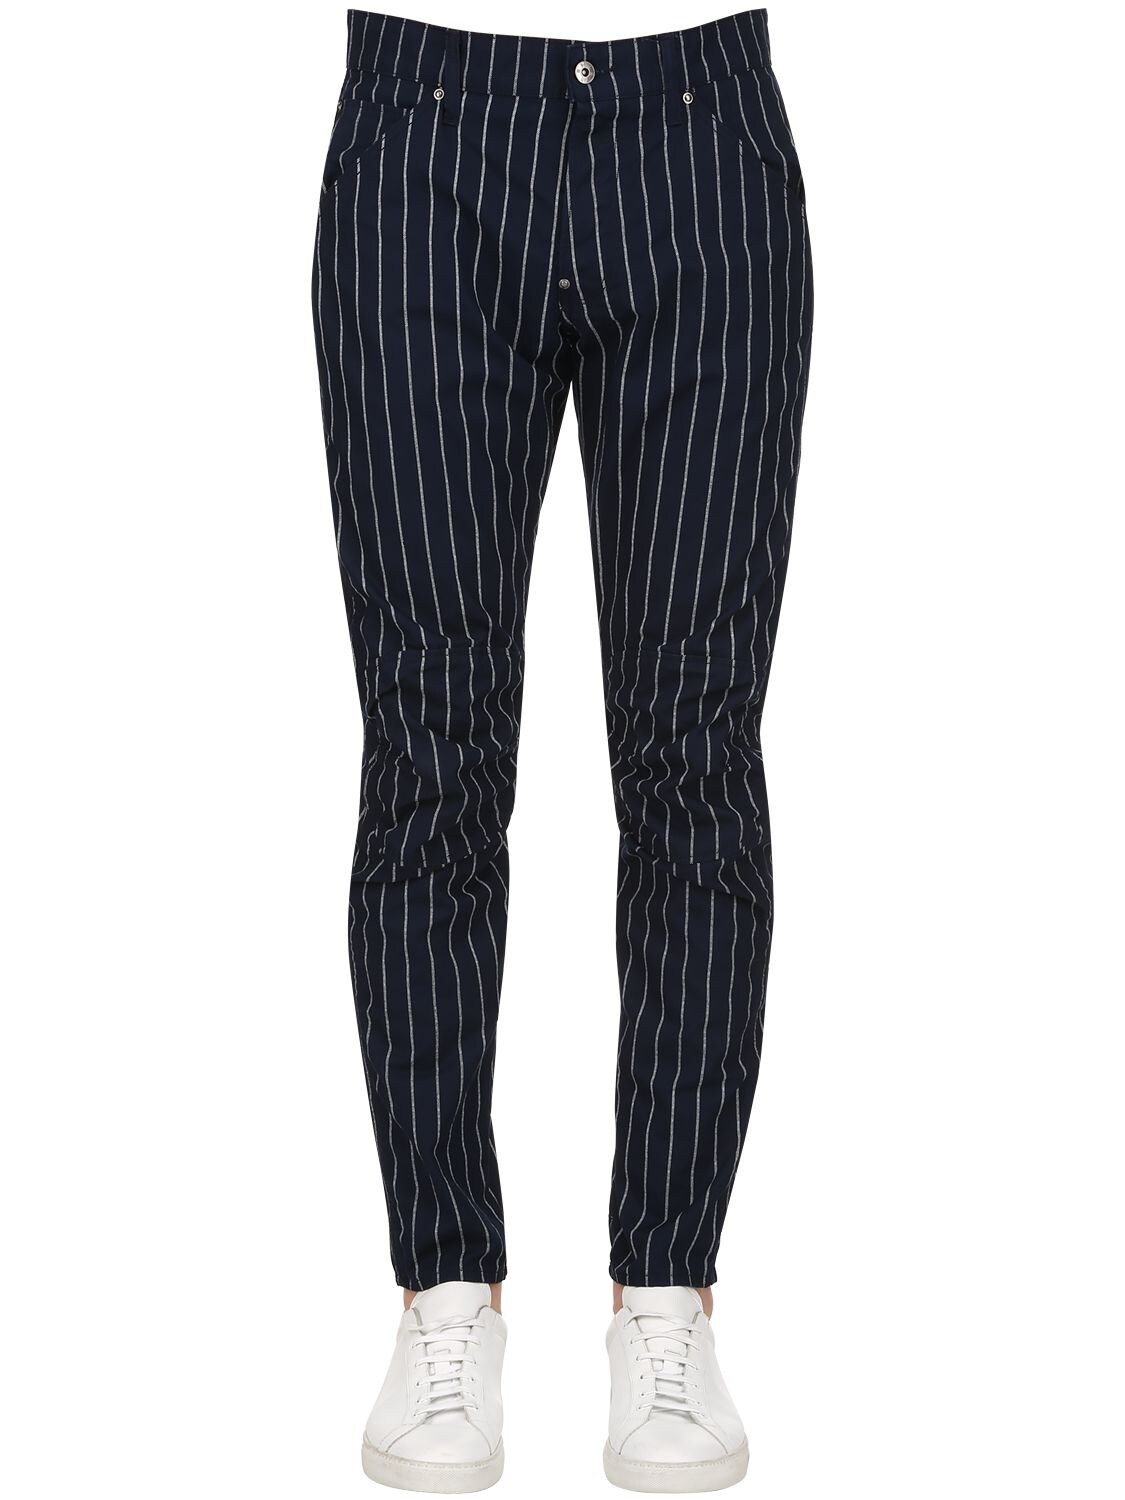 G-star By Pharrell Williams Elwood Striped Tapered Denim Jeans In Blue